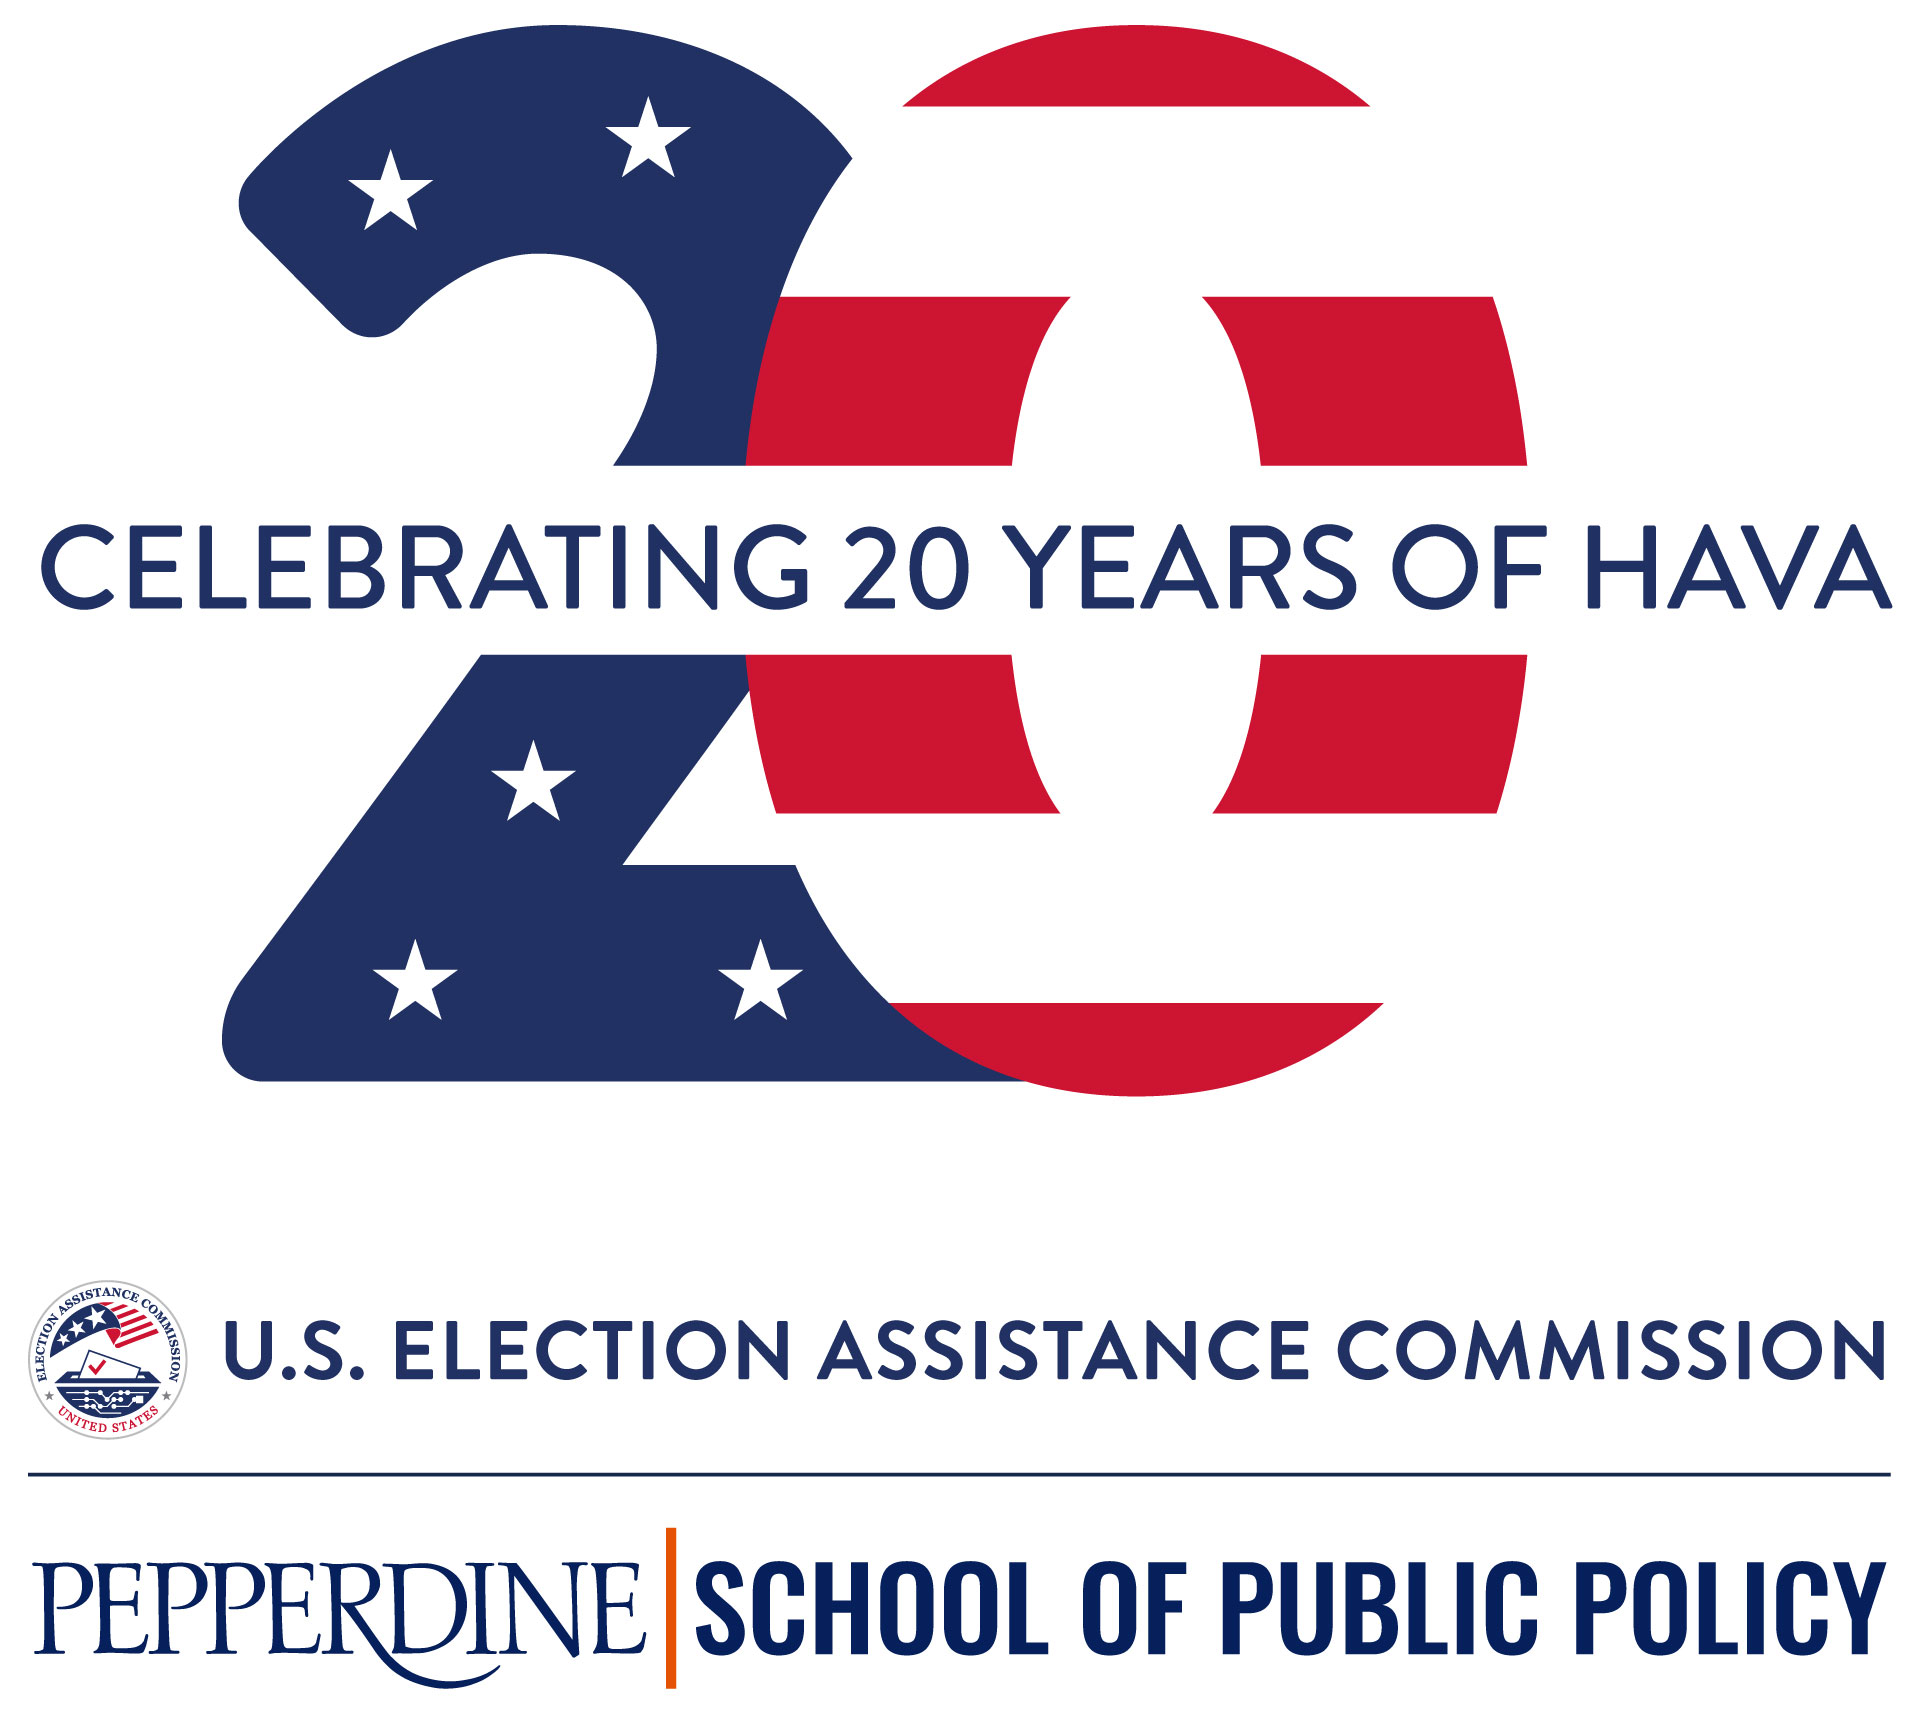 Logo with large red white and blue 20 and "Celebrating 20 Years of HAVA" in the center. Second row has the EAC seal and "U.S. Election Assistance Commission. Third row has "Pepperdine School of Public Policy."